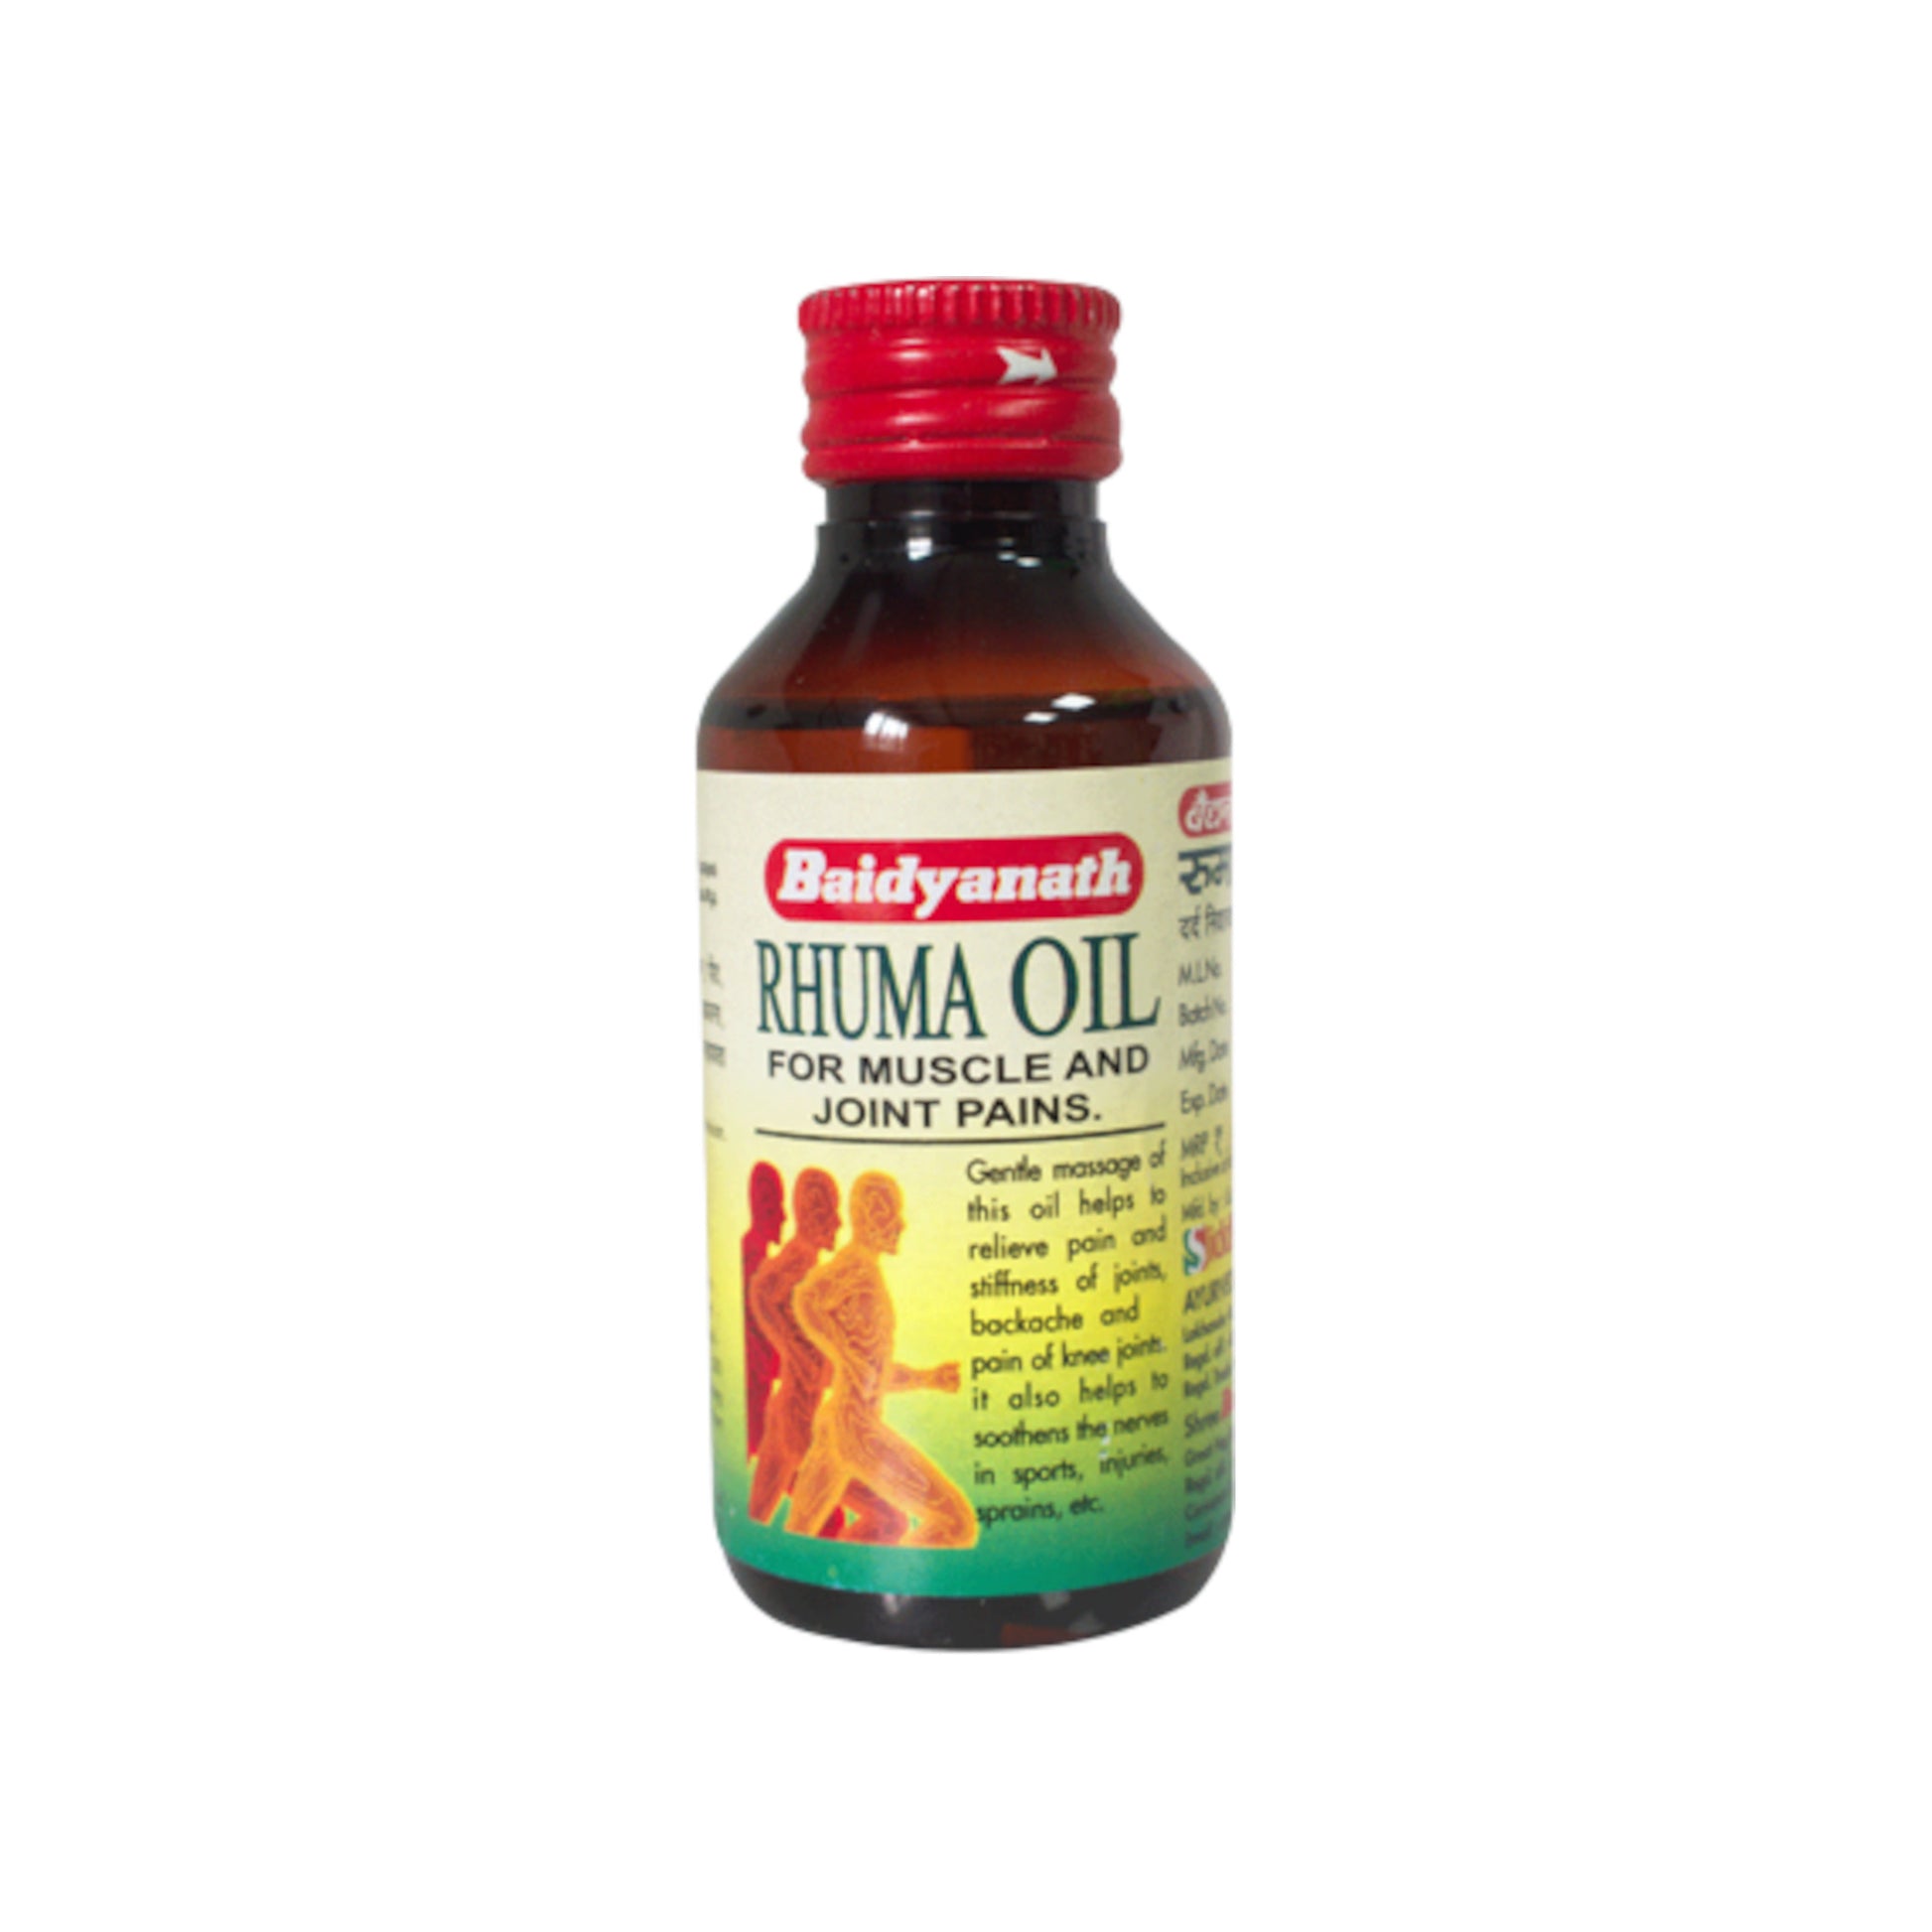 Image:  Baidyanath Rhuma Oil 100 ml : instant relief for muscle and joint pain.